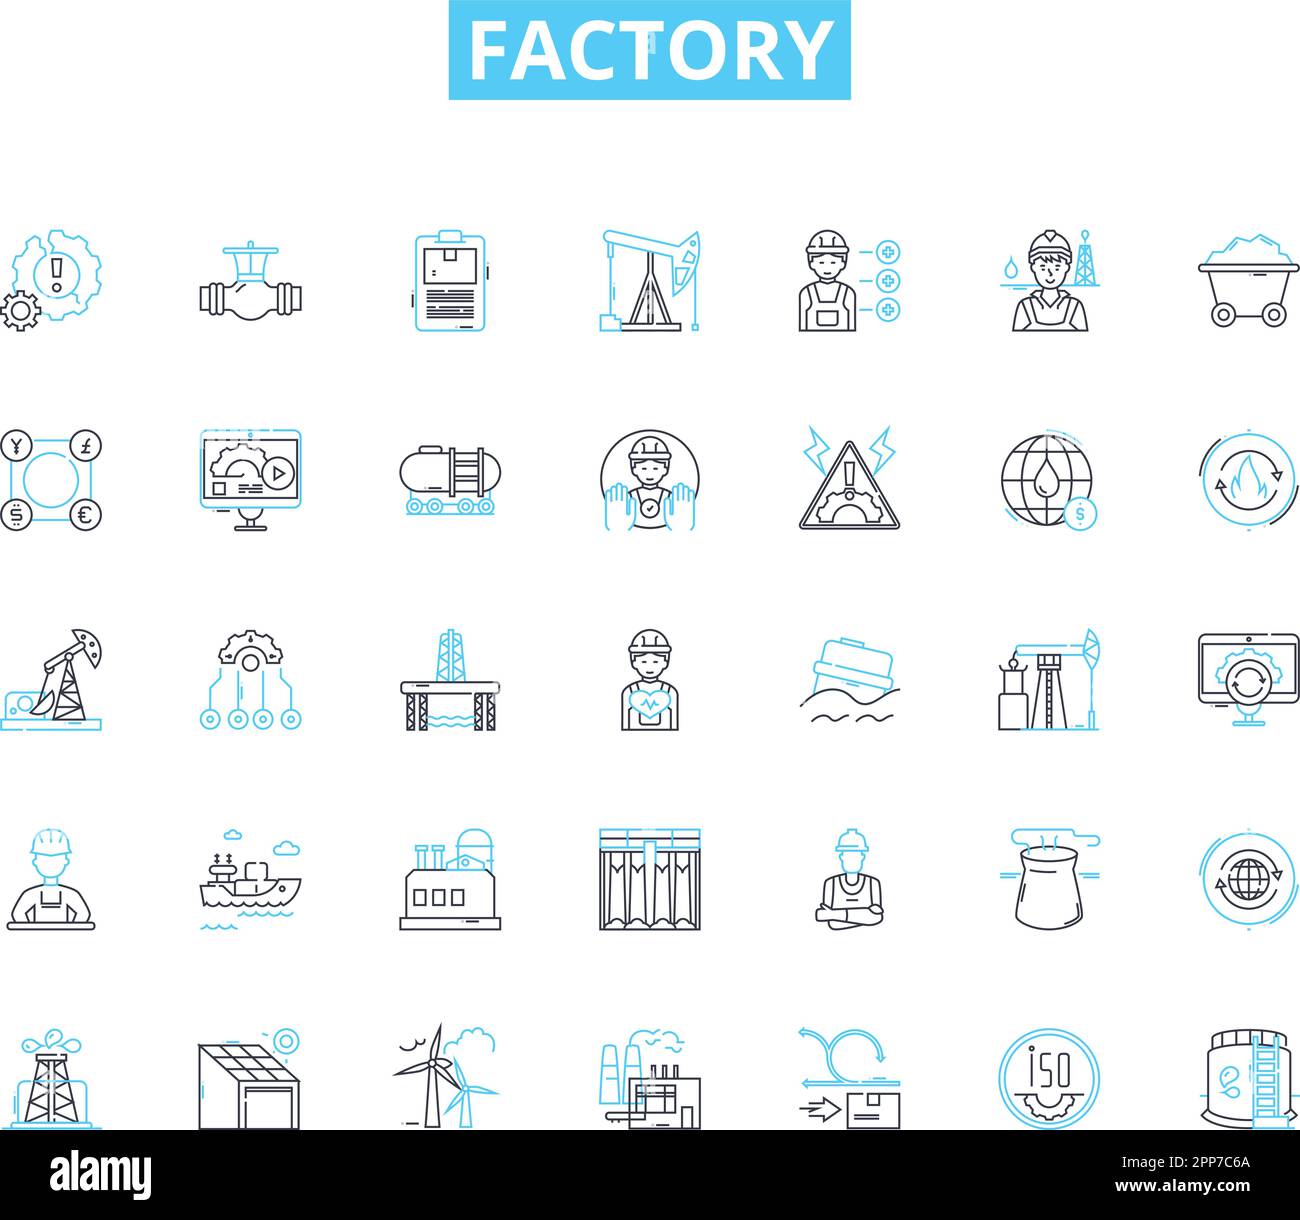 Factory linear icons set. Production, Machinery, Industrial, Manufacturing, Assembly, Workshop, Automation line vector and concept signs Stock Vector